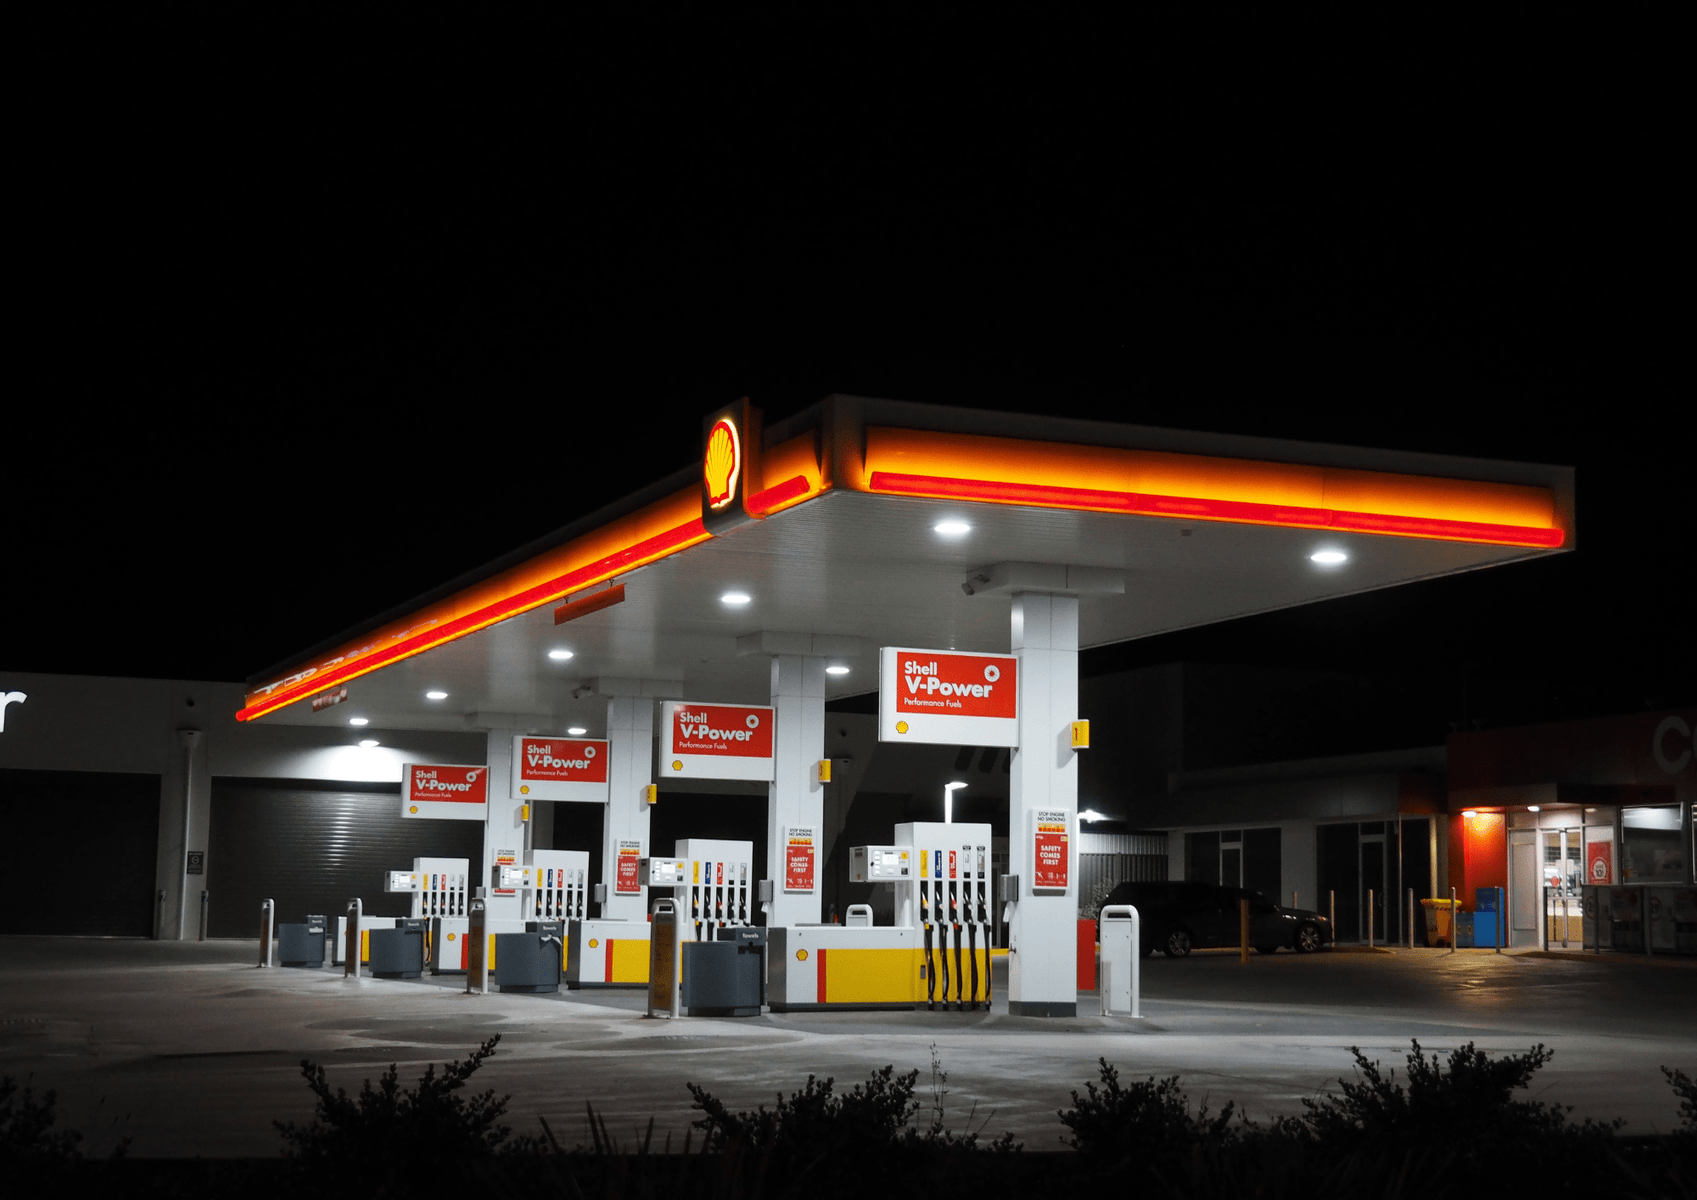 Coles Express Fuel Station